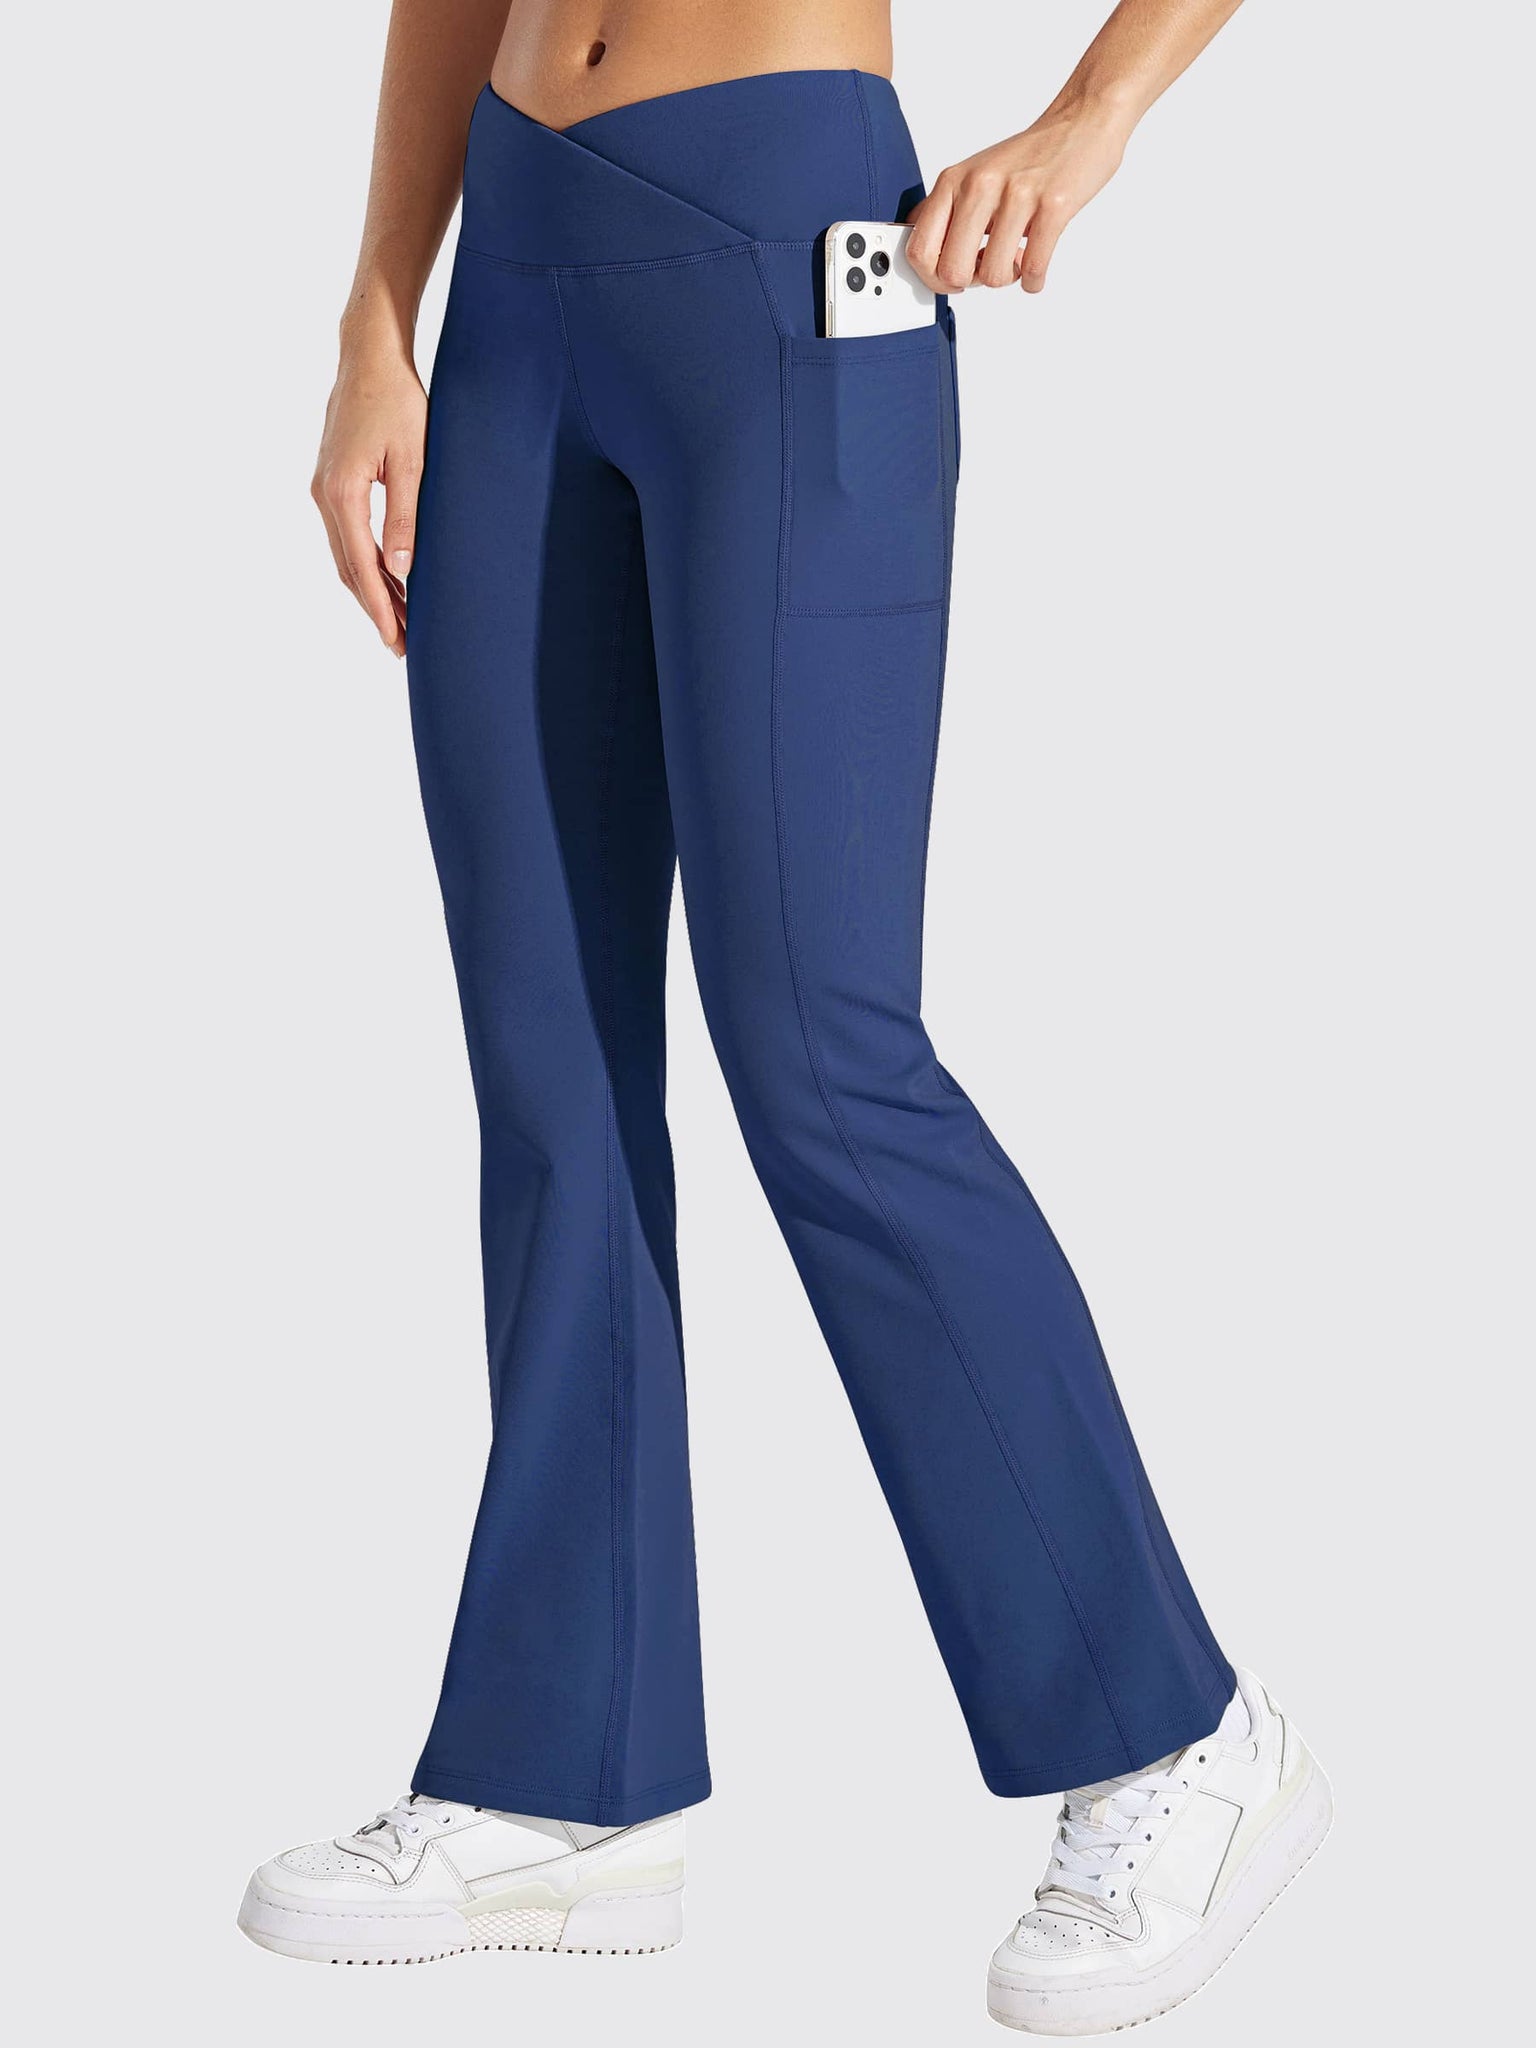 Laureate Fleece Lined Crossover Flared Pants